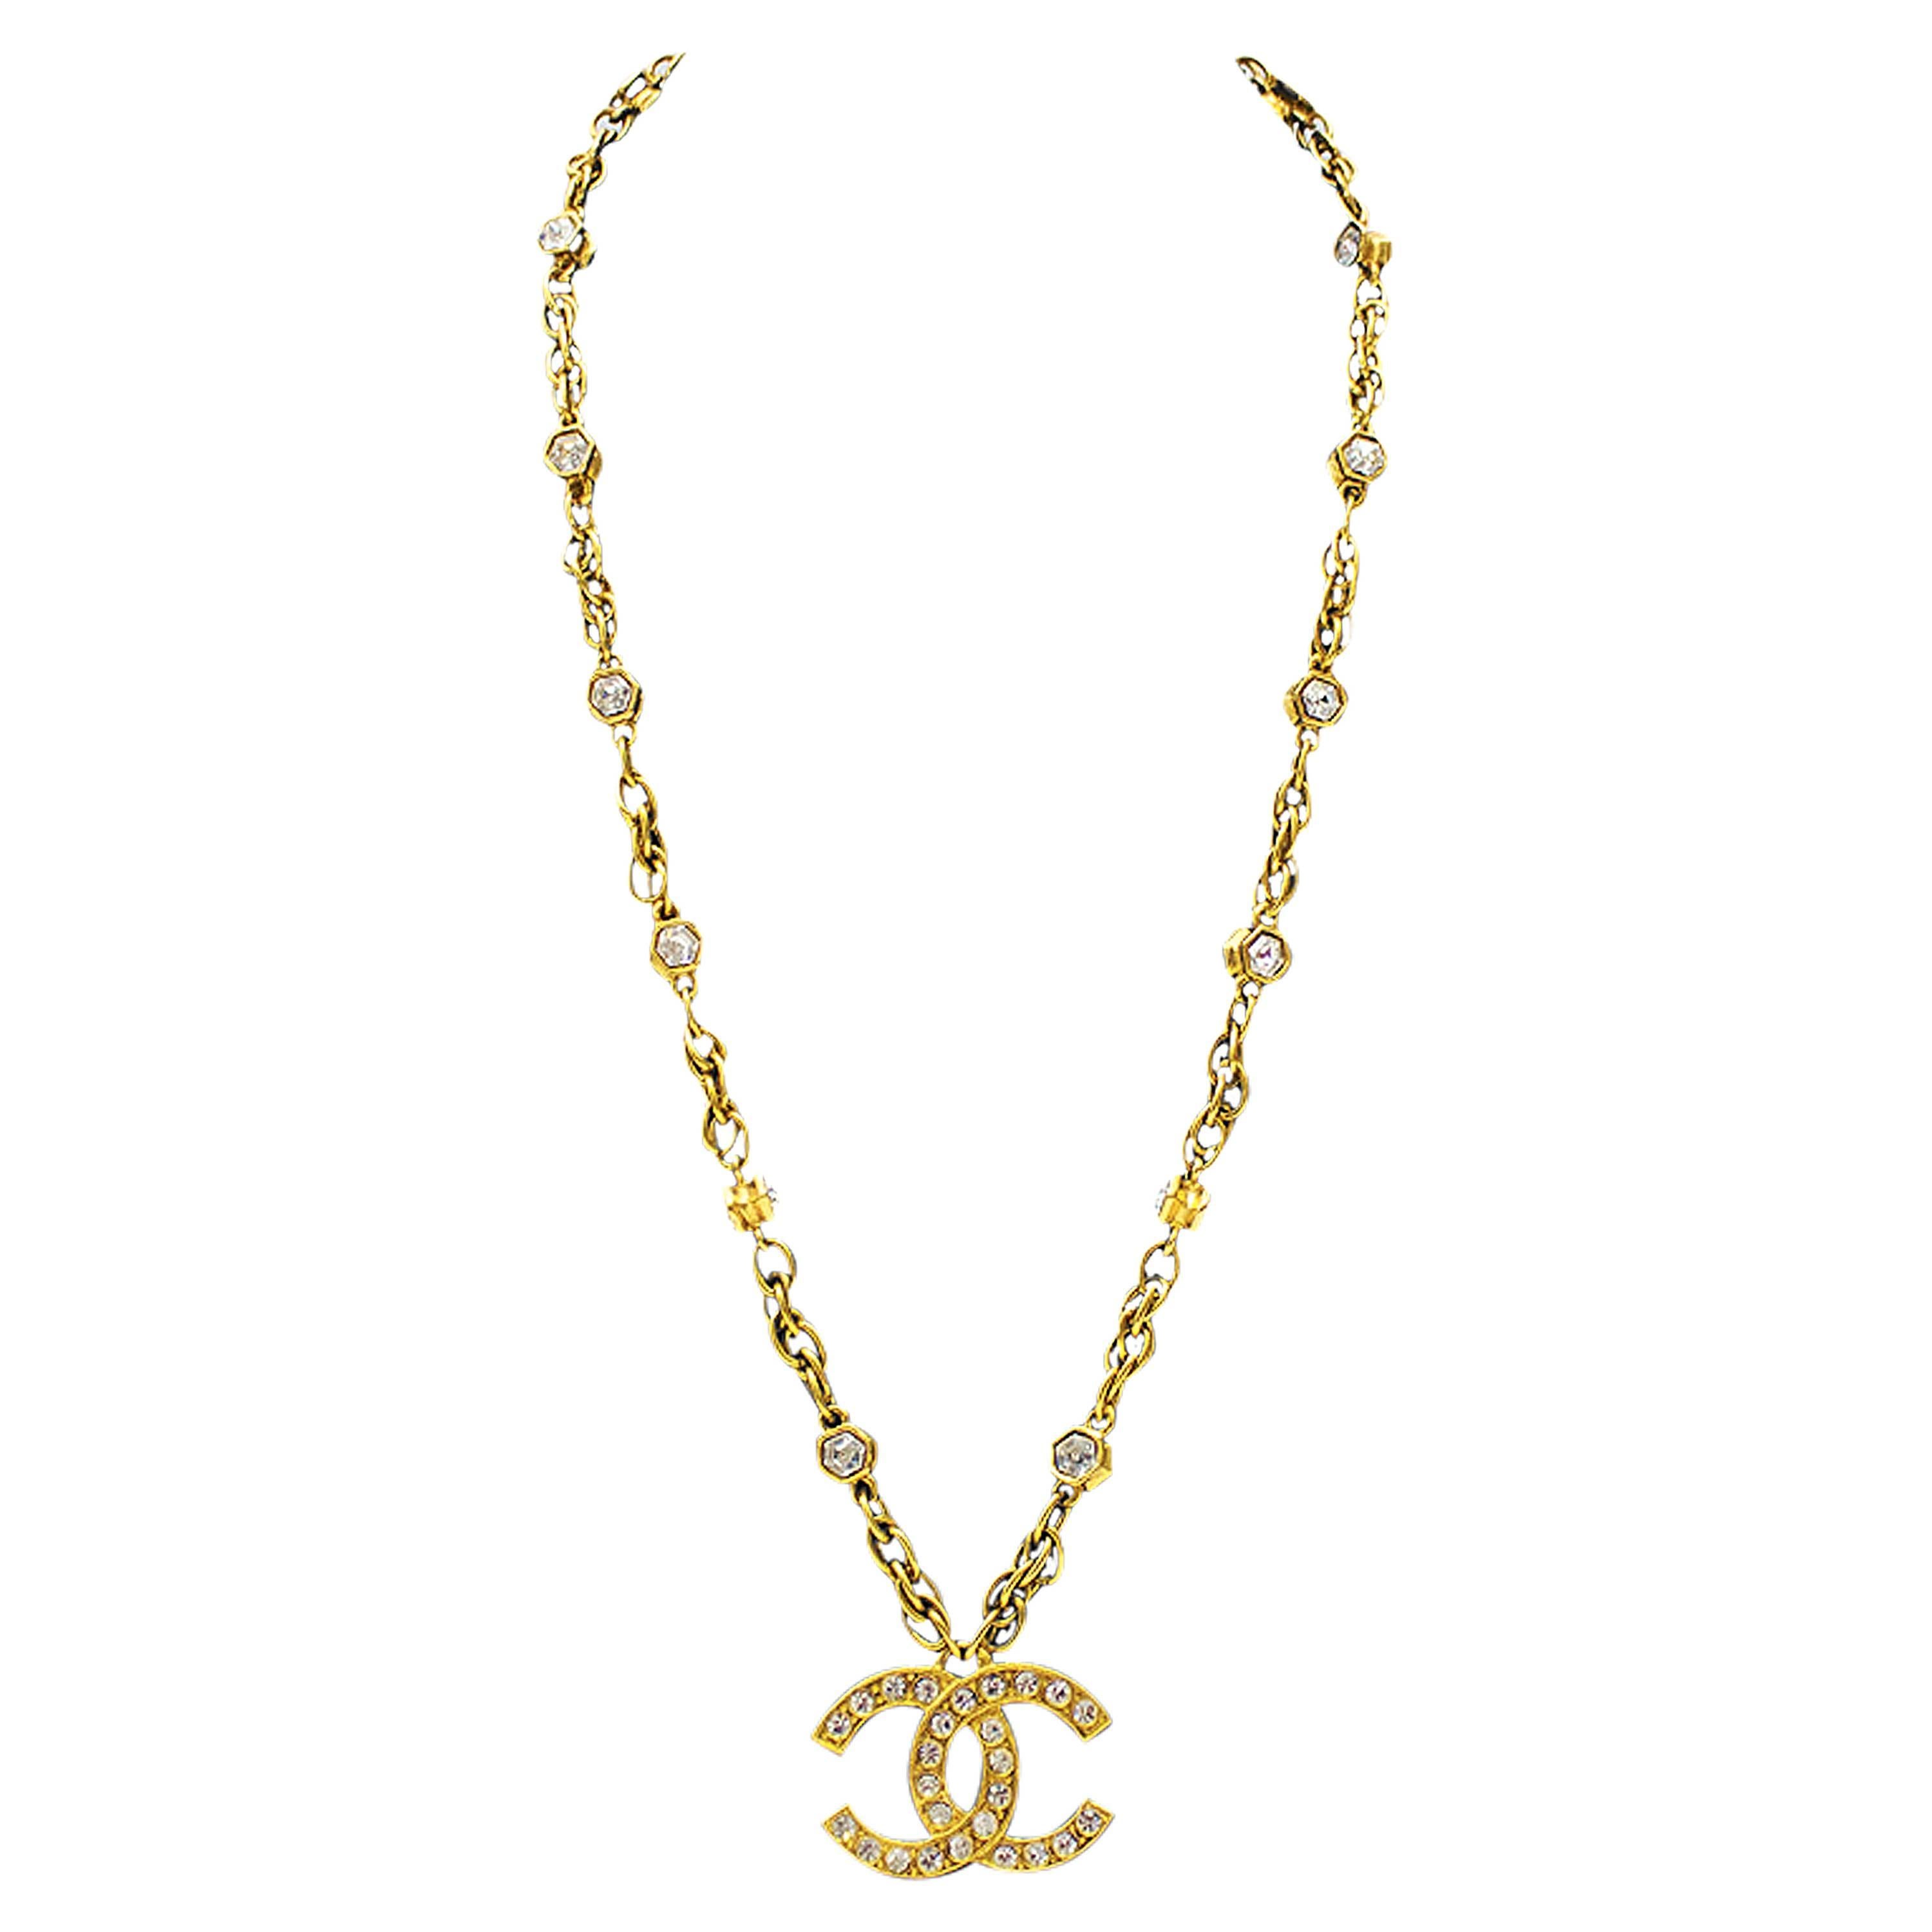 1980's Chanel Chain Necklace with CC Pendant 